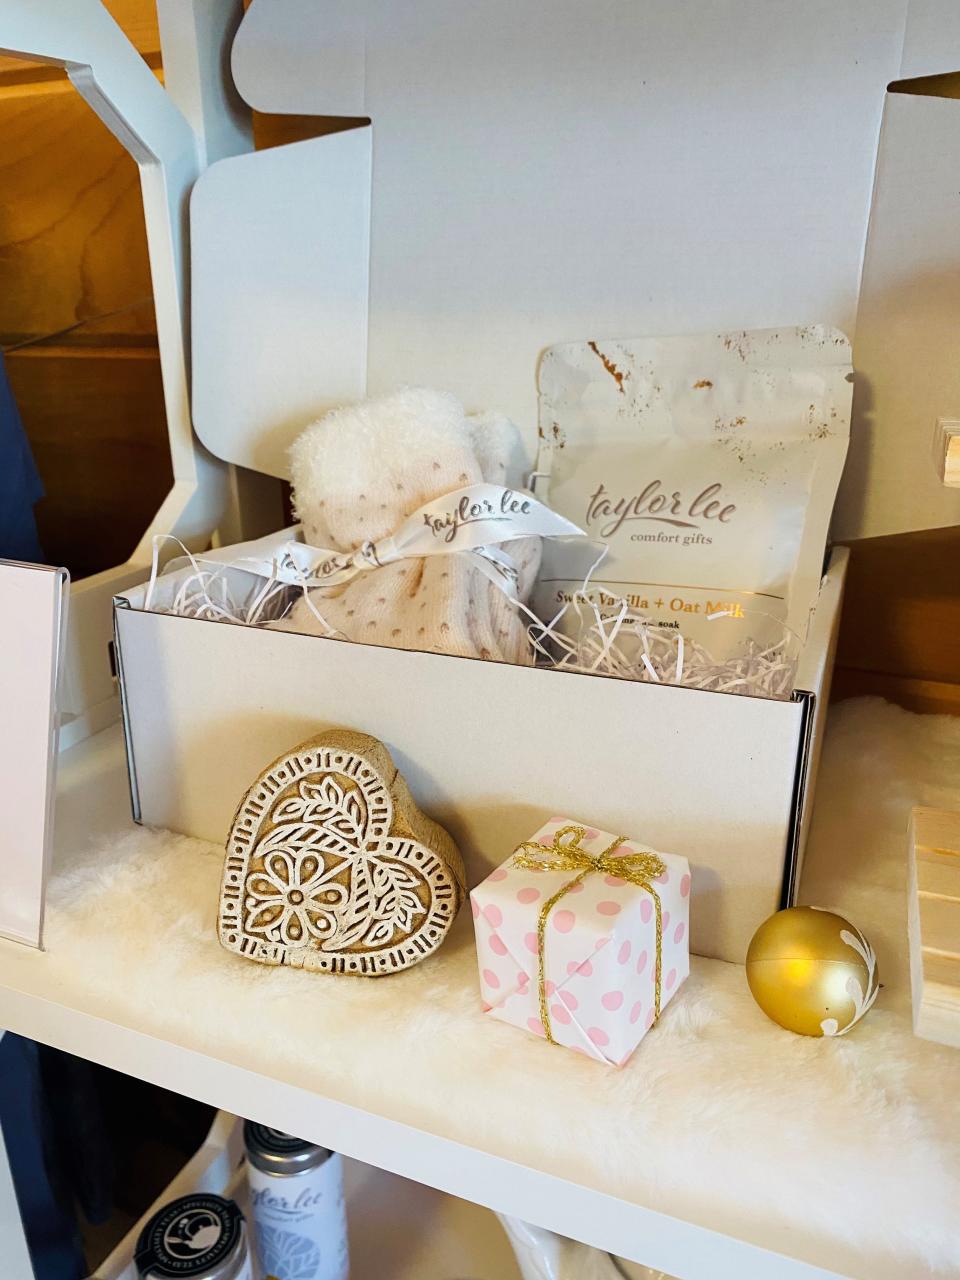 Taylor Lee Comfort, a heartfelt gifting service with a mission to gift women and men with luxurious items for the body, mind and home has opened its first seasonal storefront in Norton Commons.